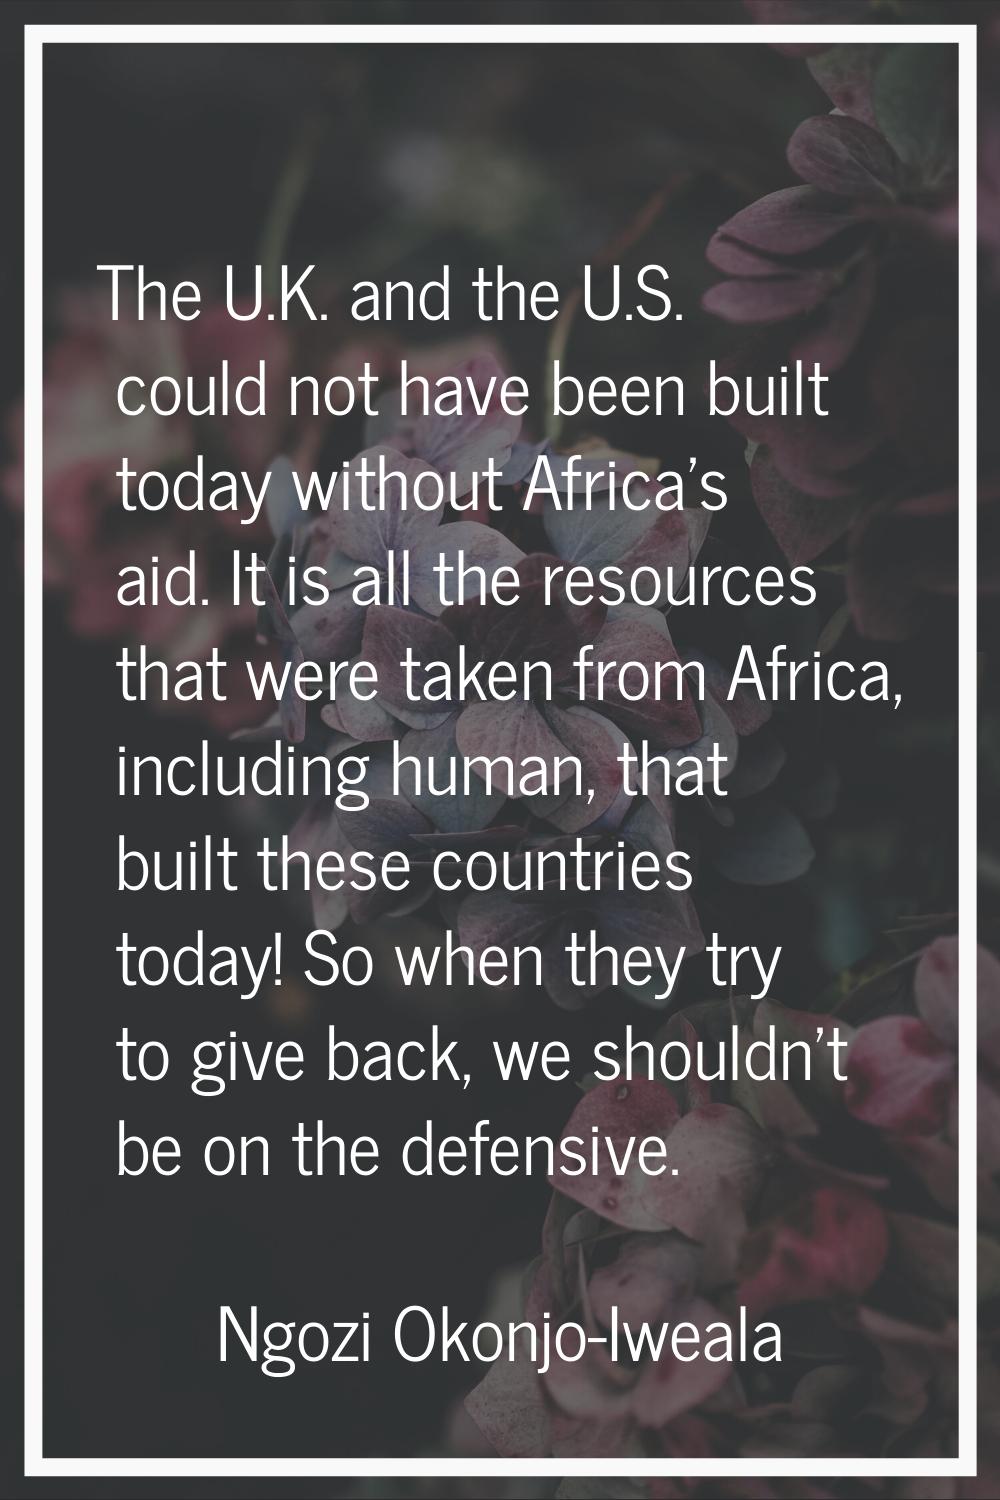 The U.K. and the U.S. could not have been built today without Africa's aid. It is all the resources